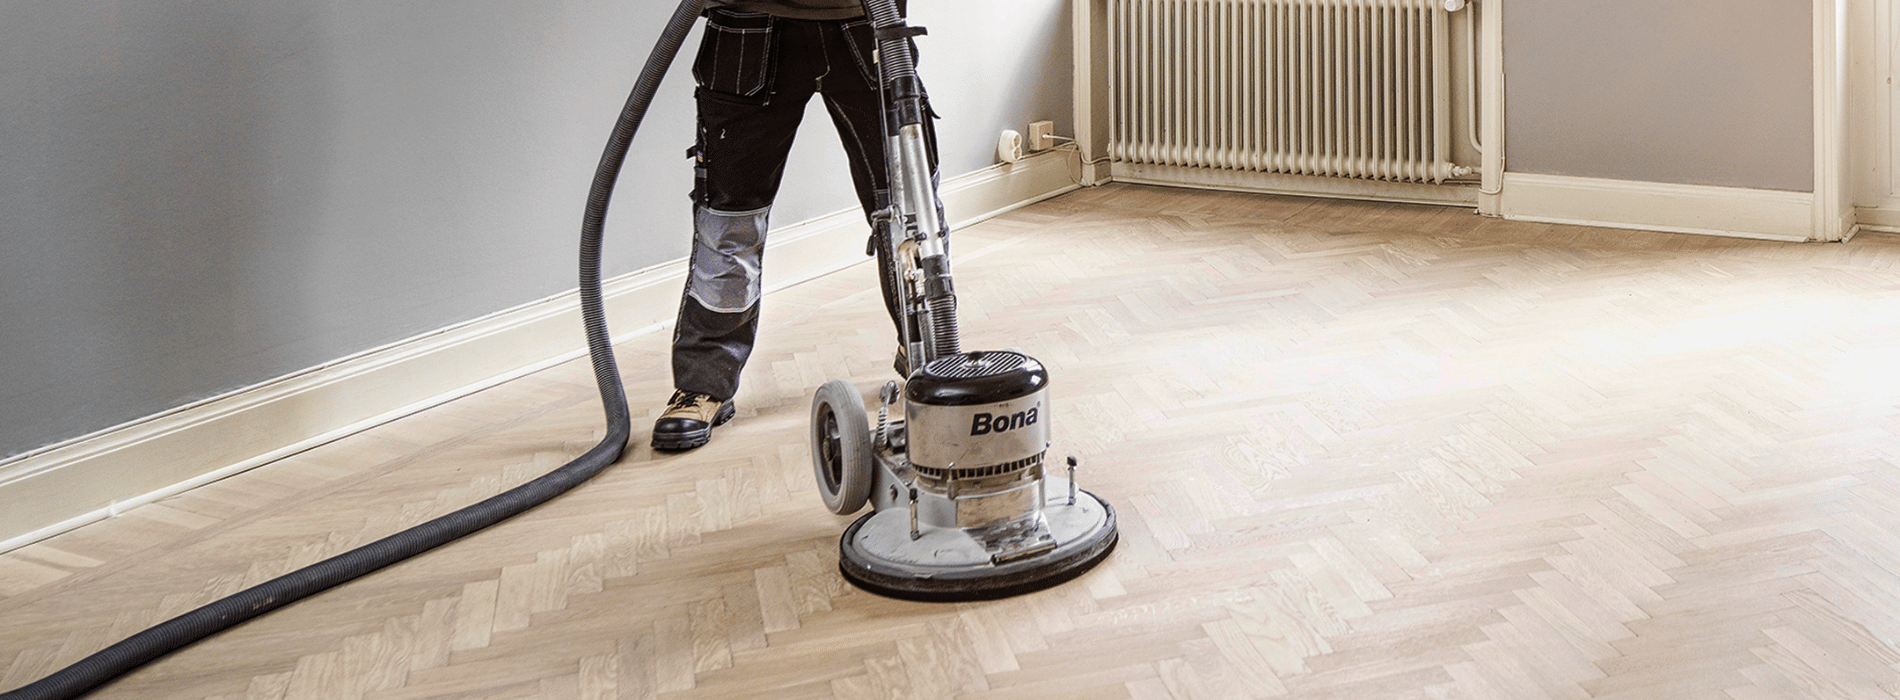 In Wood Green, N22, Mr Sander® use the powerful Bona FlexiSand 1.9 buffer sander, equipped with a Ø 407 mm dimension and an impressive 1.9 kW effect. With a voltage of 230 V and a frequency of 50 Hz/60 Hz, our dust extraction system with a HEPA filter ensures a clean and efficient result. 